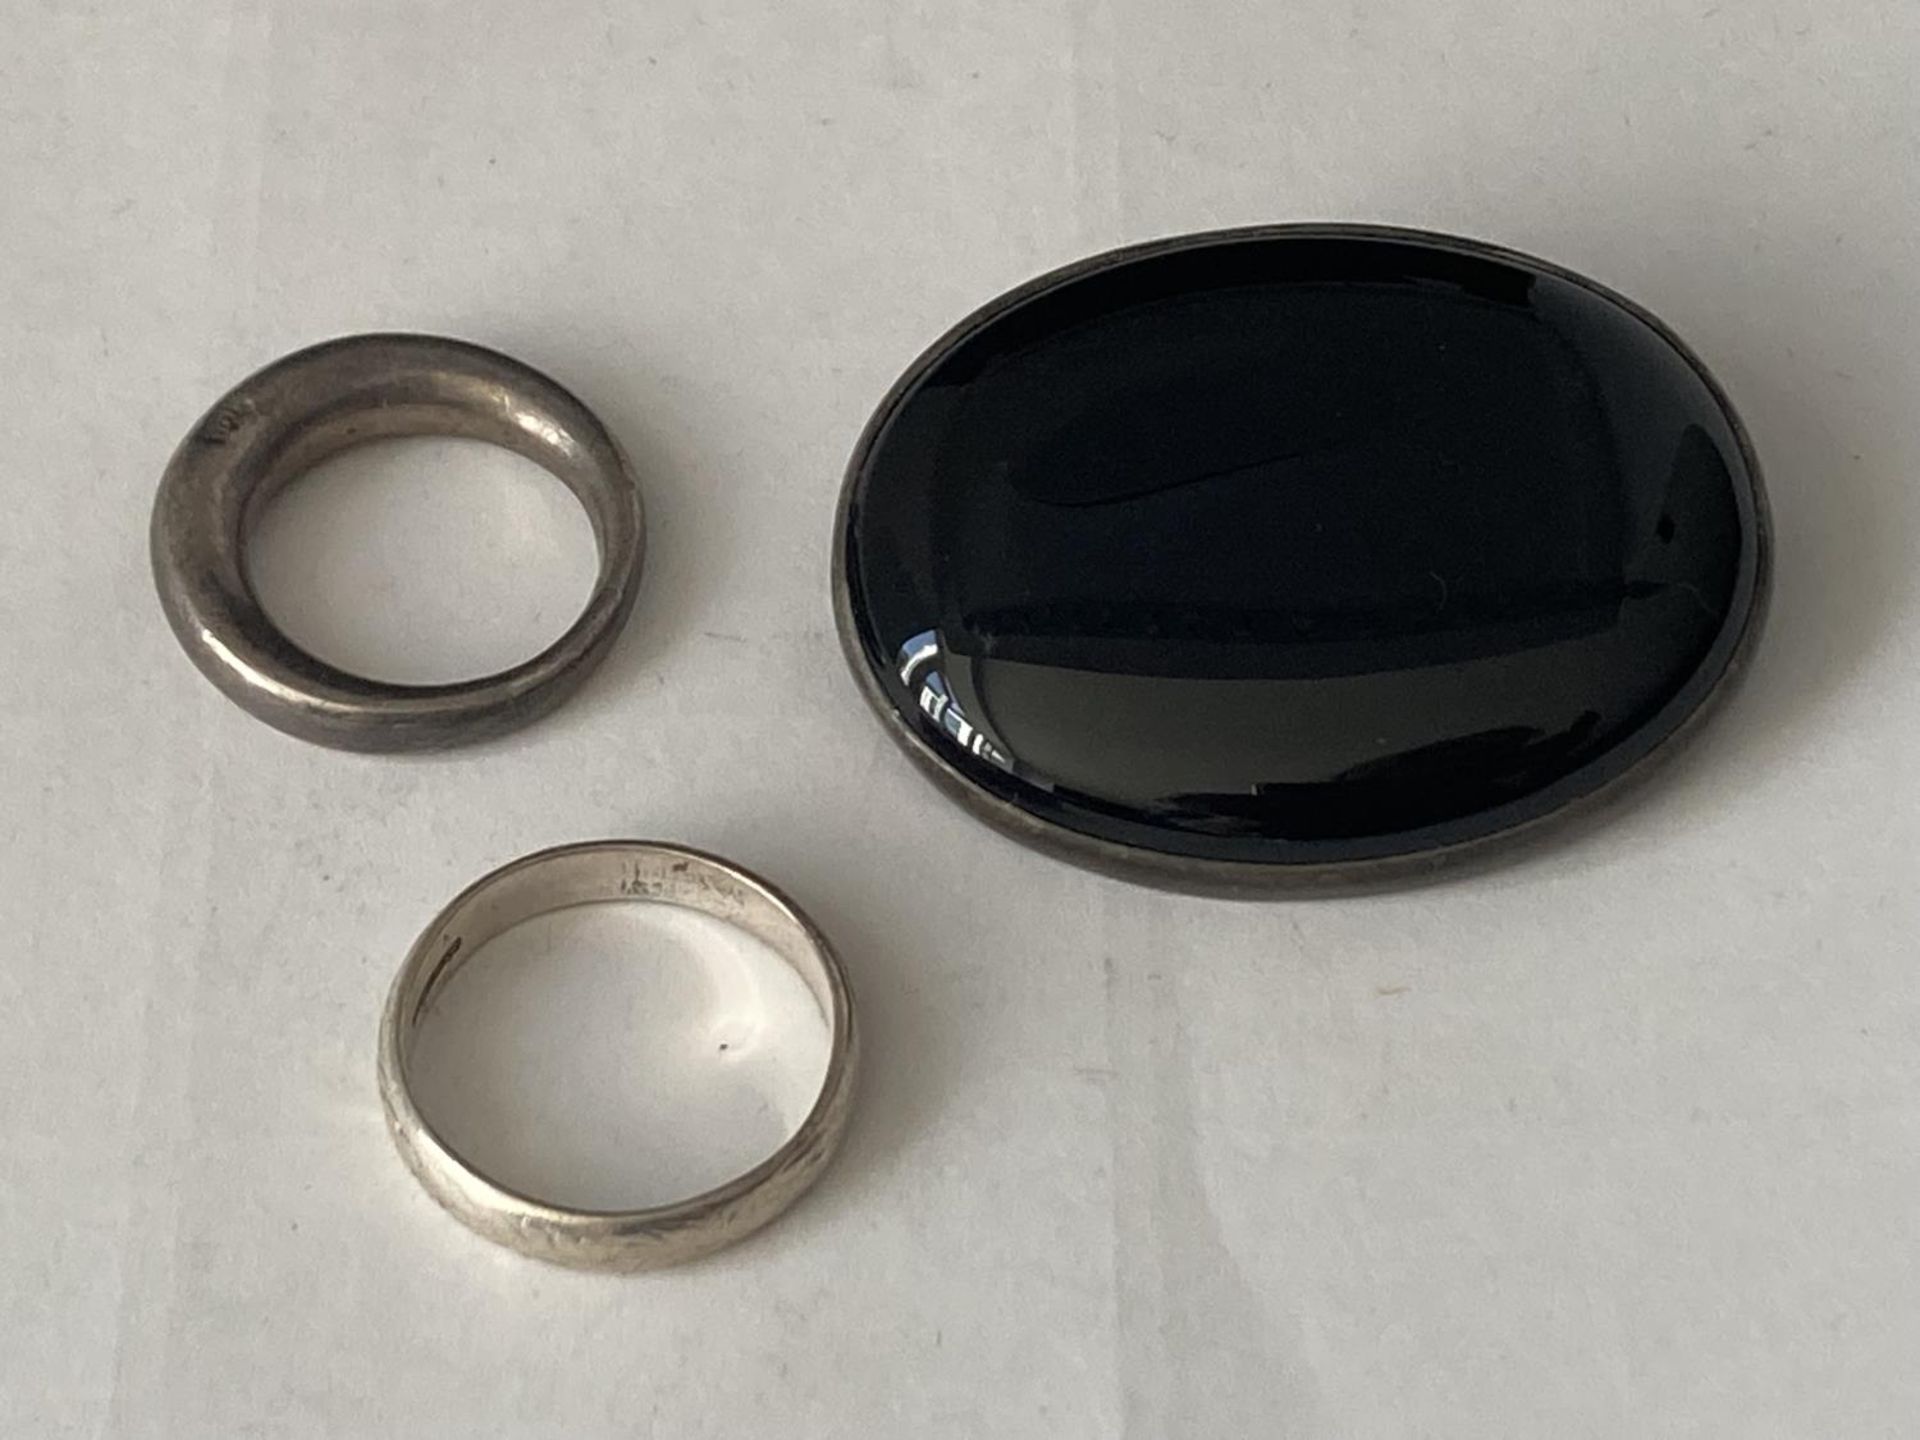 THREE SILVER ITEMS TO INCLUDE TWO RINGS AND A VINTAGE BLACK STONE BROOCH - Image 2 of 10